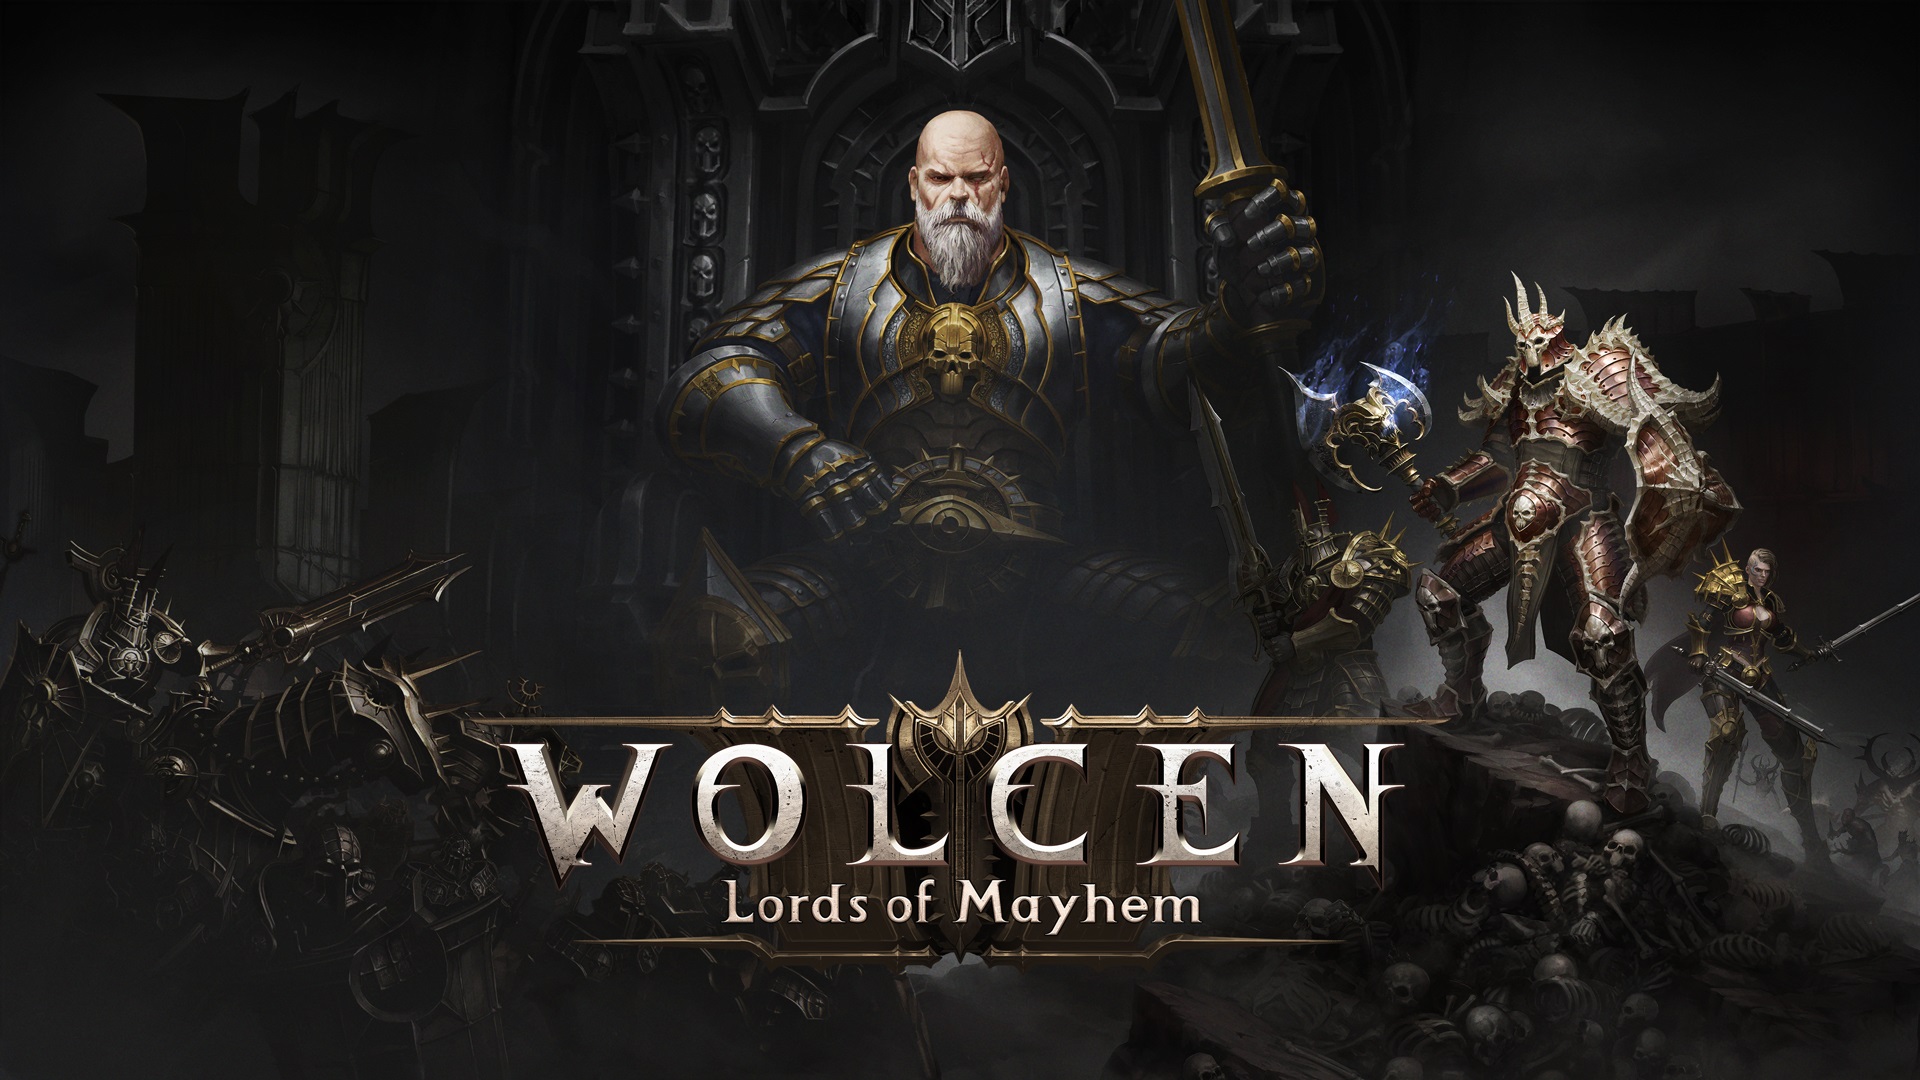 Wolcen: Lords of Mayhem is getting console ports